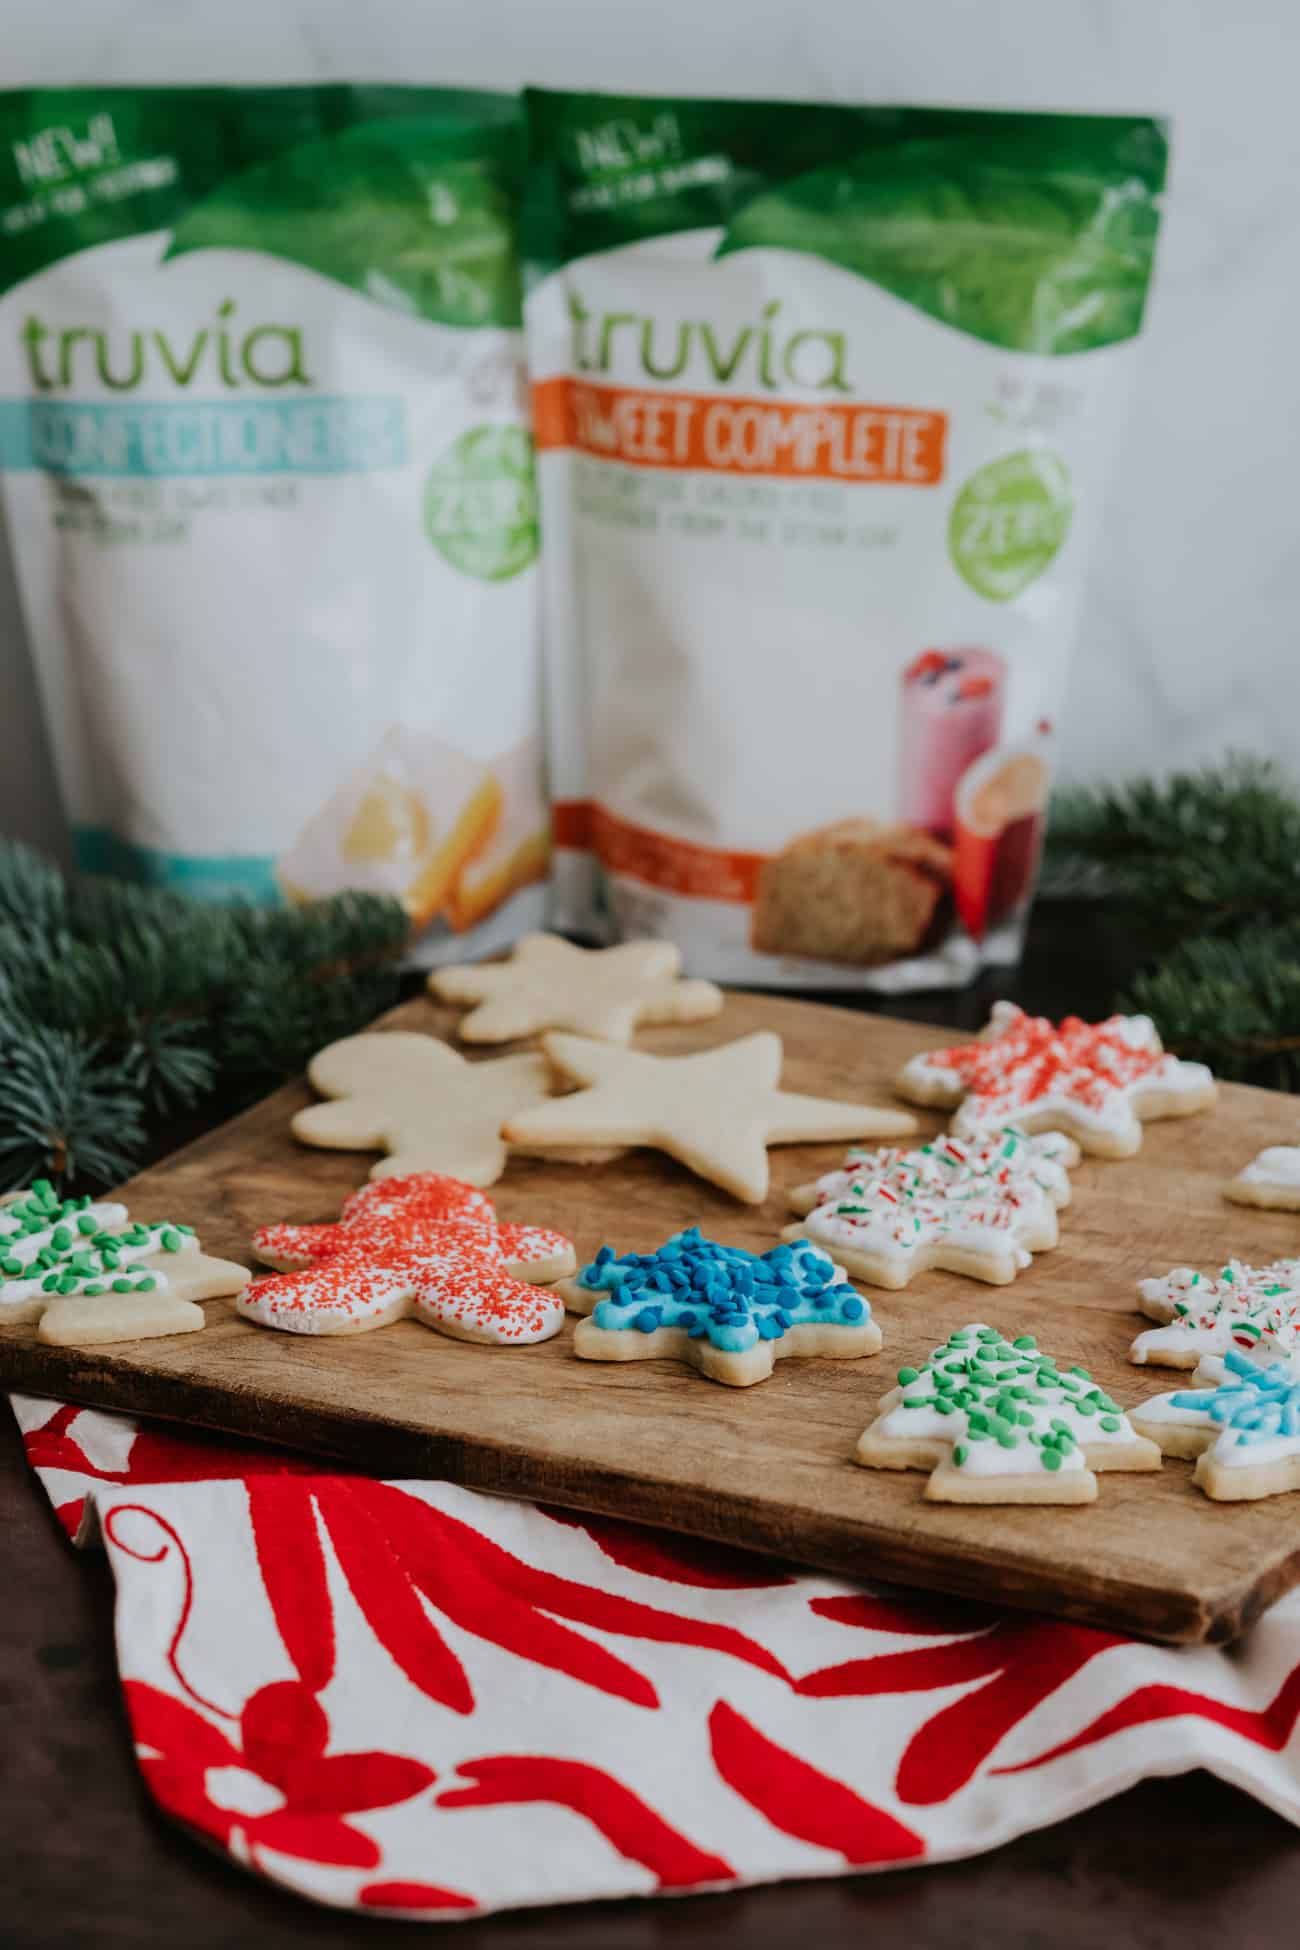 wooden platter of decorated christmas cookies with a bag of truvia powdered sugar alternative and regular sugar alternative.